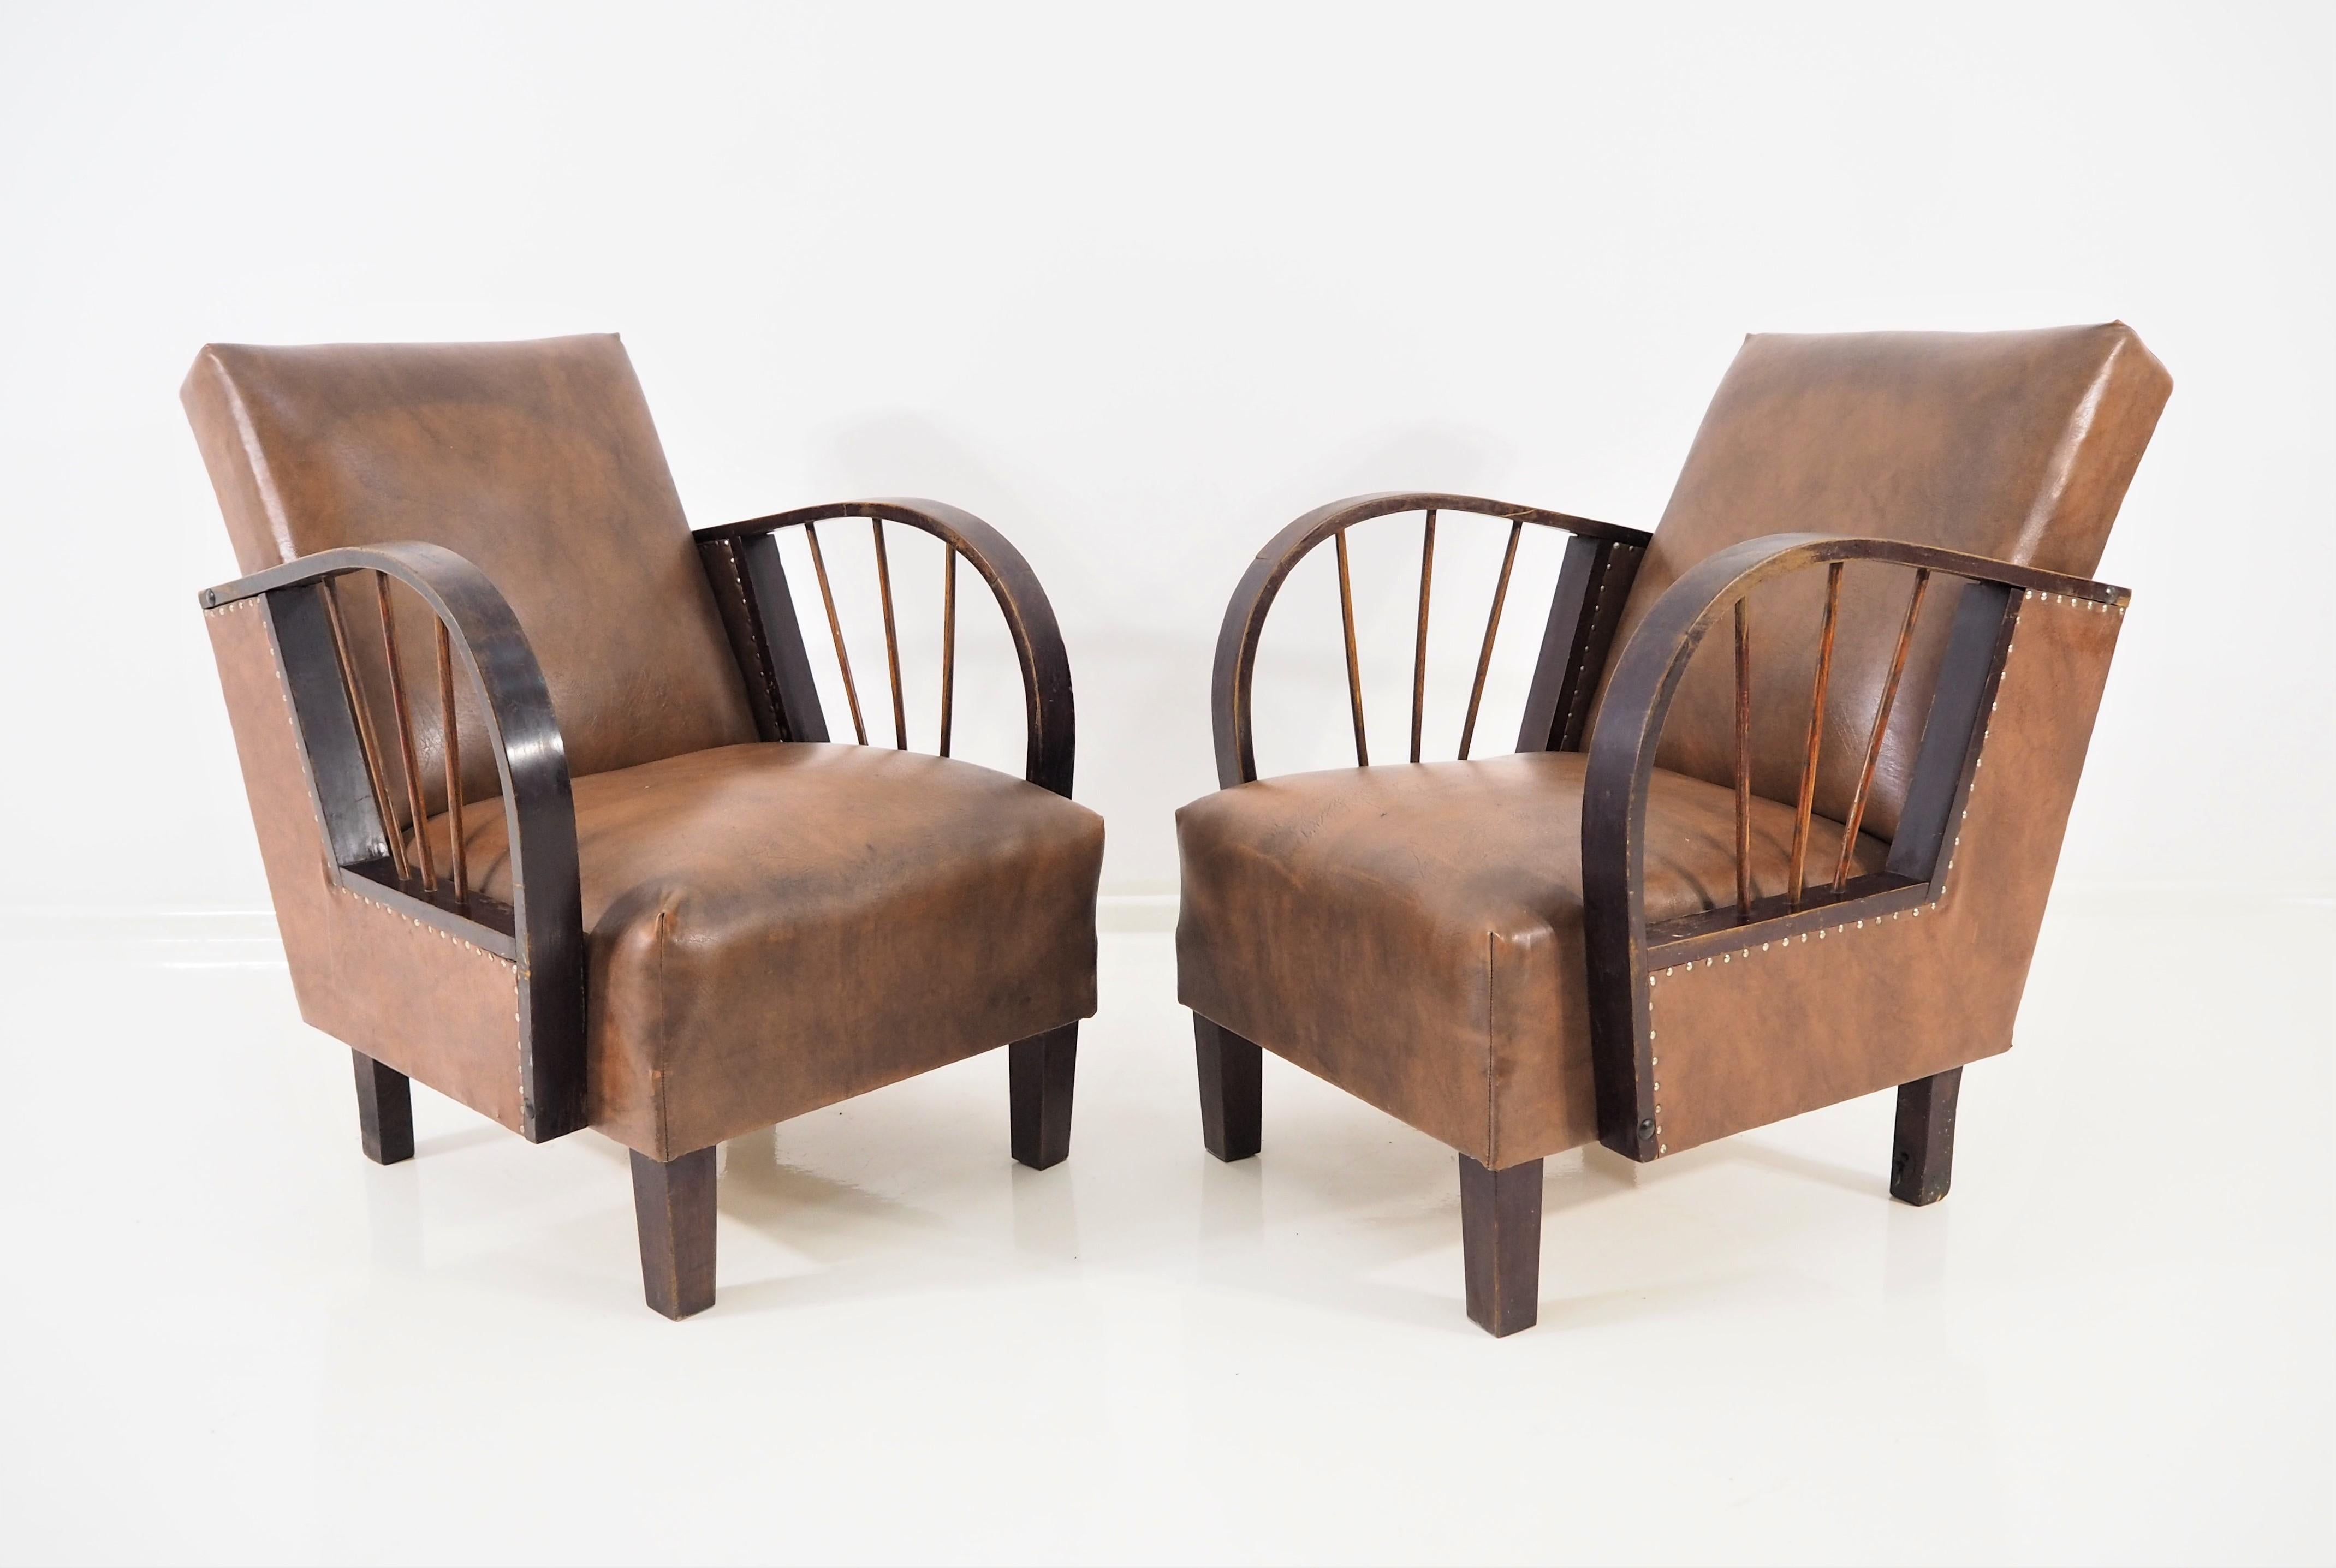 Art Deco style lounge chairs, set of 2 made from 1970. The original condition has not been carried out any renovation, no cracks or fractures.
Dimensions: height 83 cm, width 64 cm, depth 80 cm.